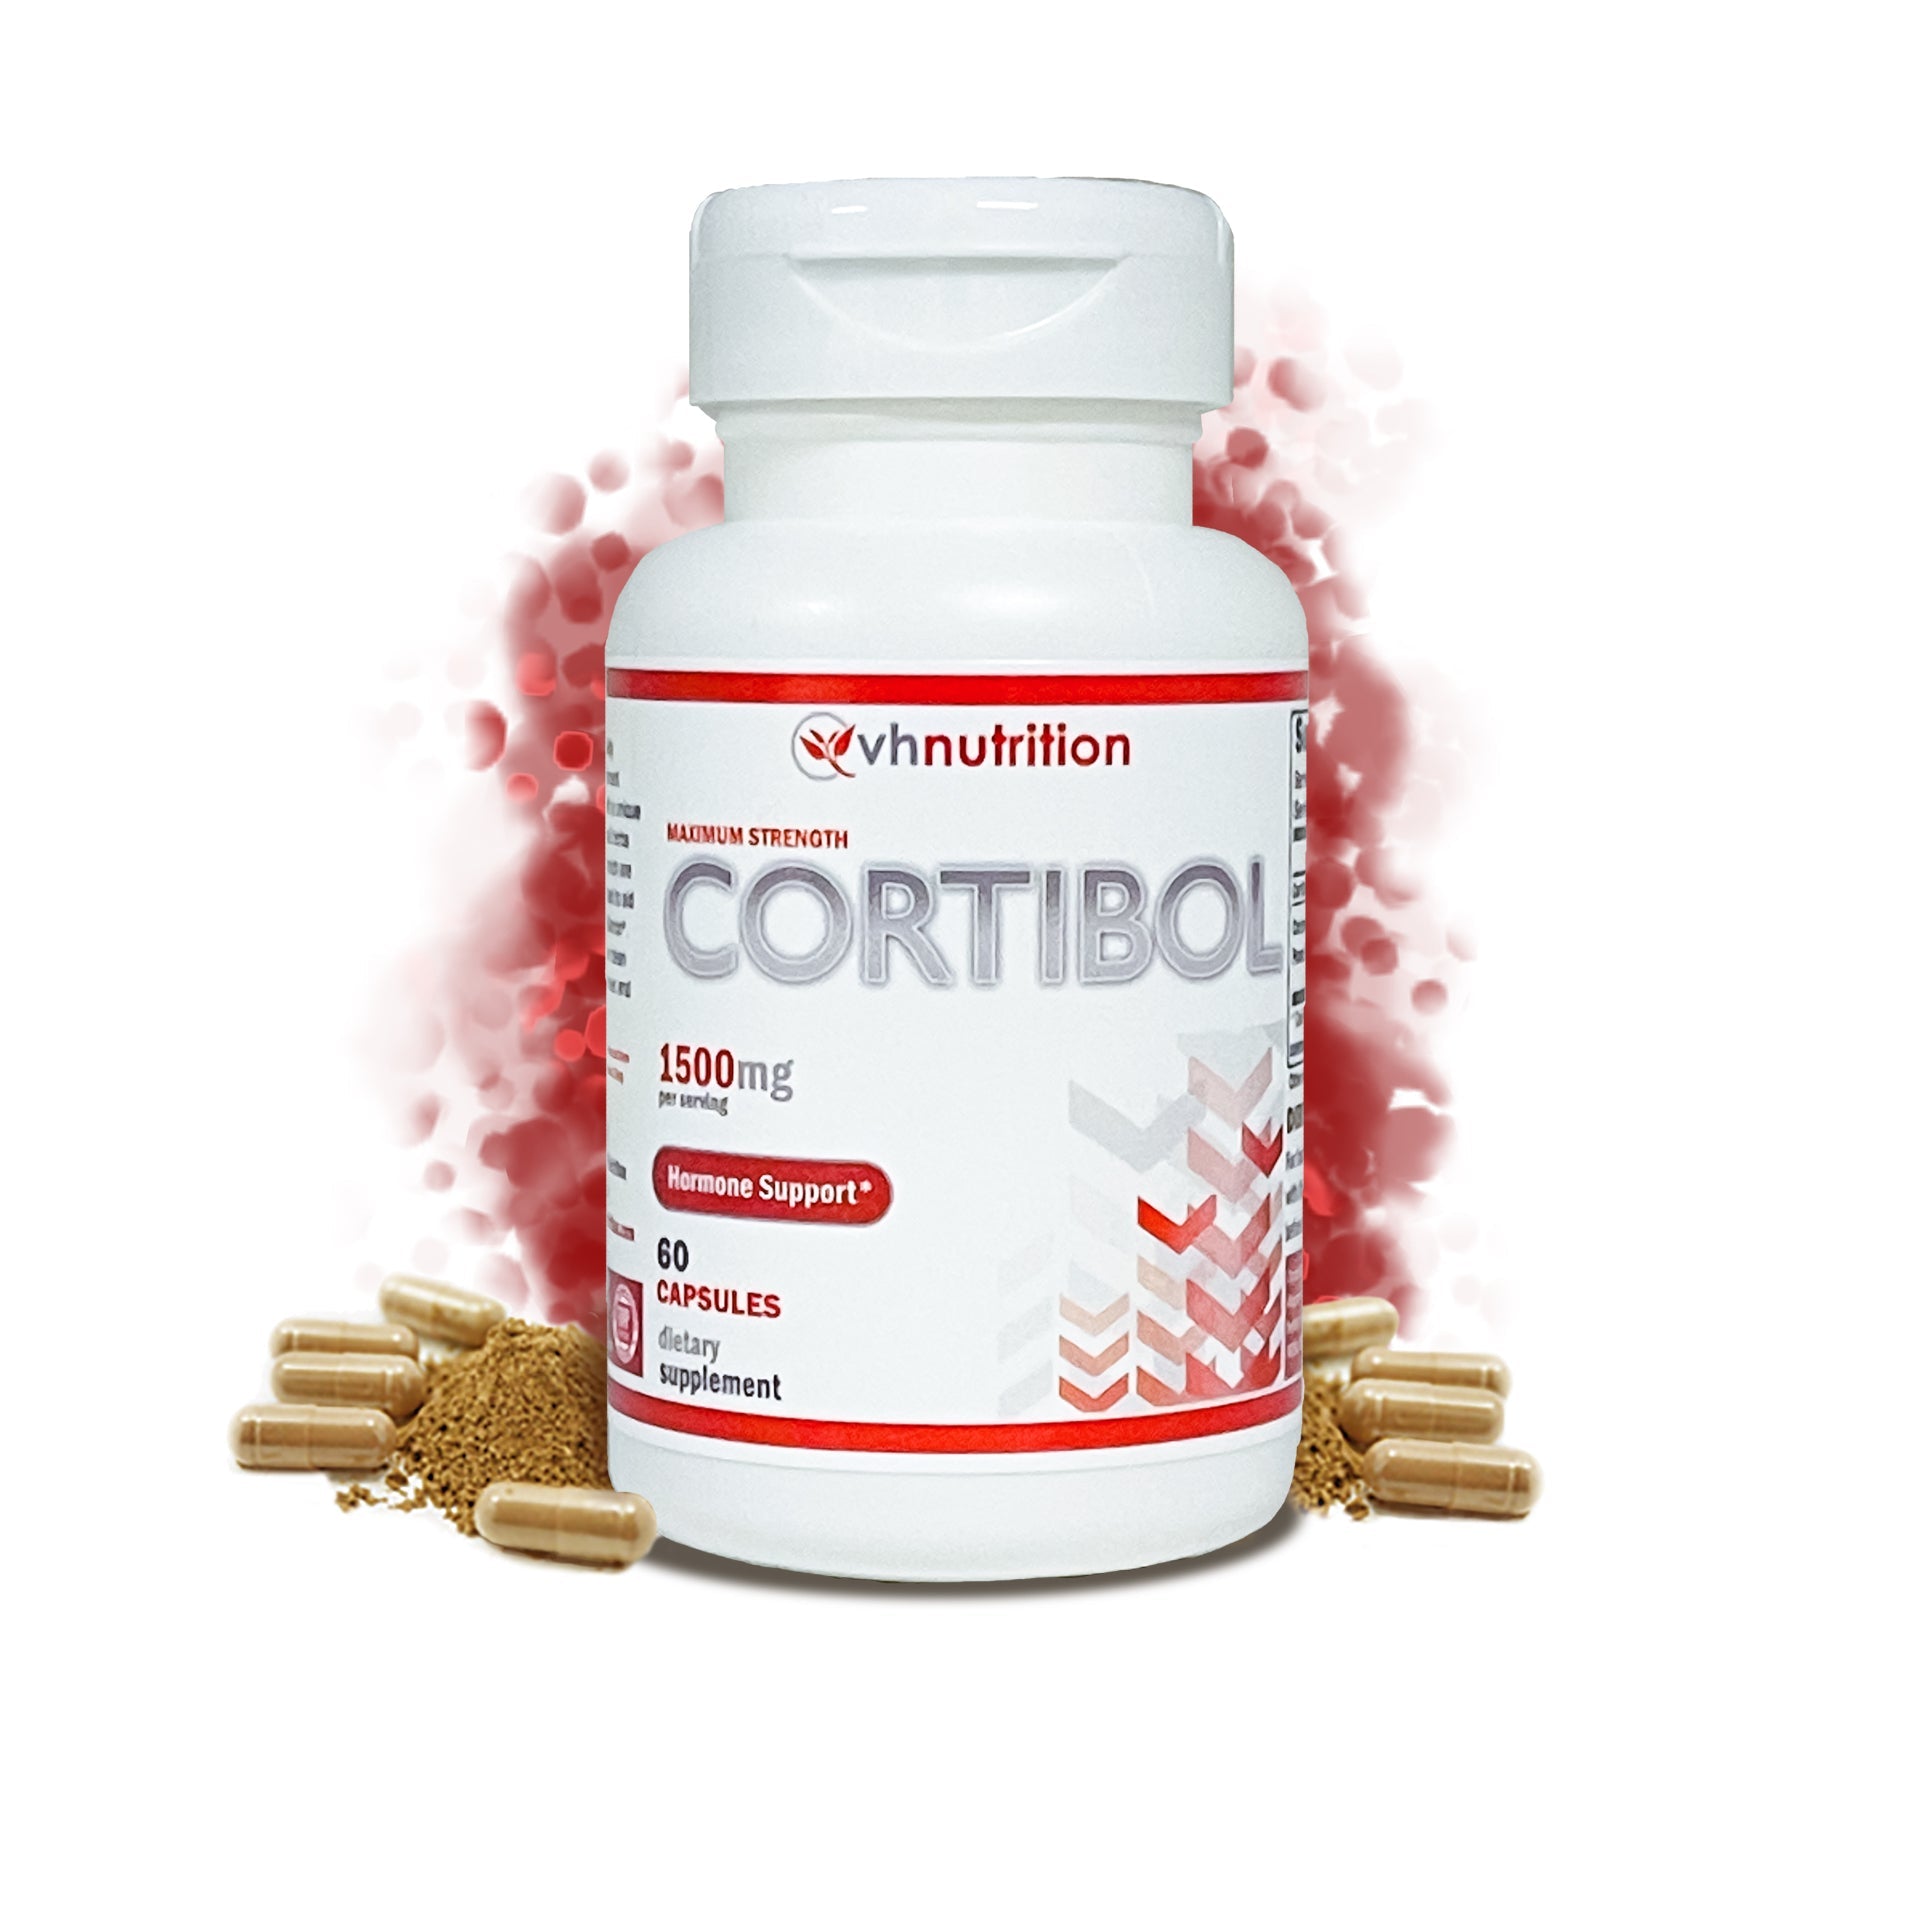 VH Nutrition CORTIBOL | Cortisol Manager* Supplement | Maximum Strength Adrenal Support* for Men and Women | Rhodiola, Cordyceps, and Eleuthero | 60 Capsules